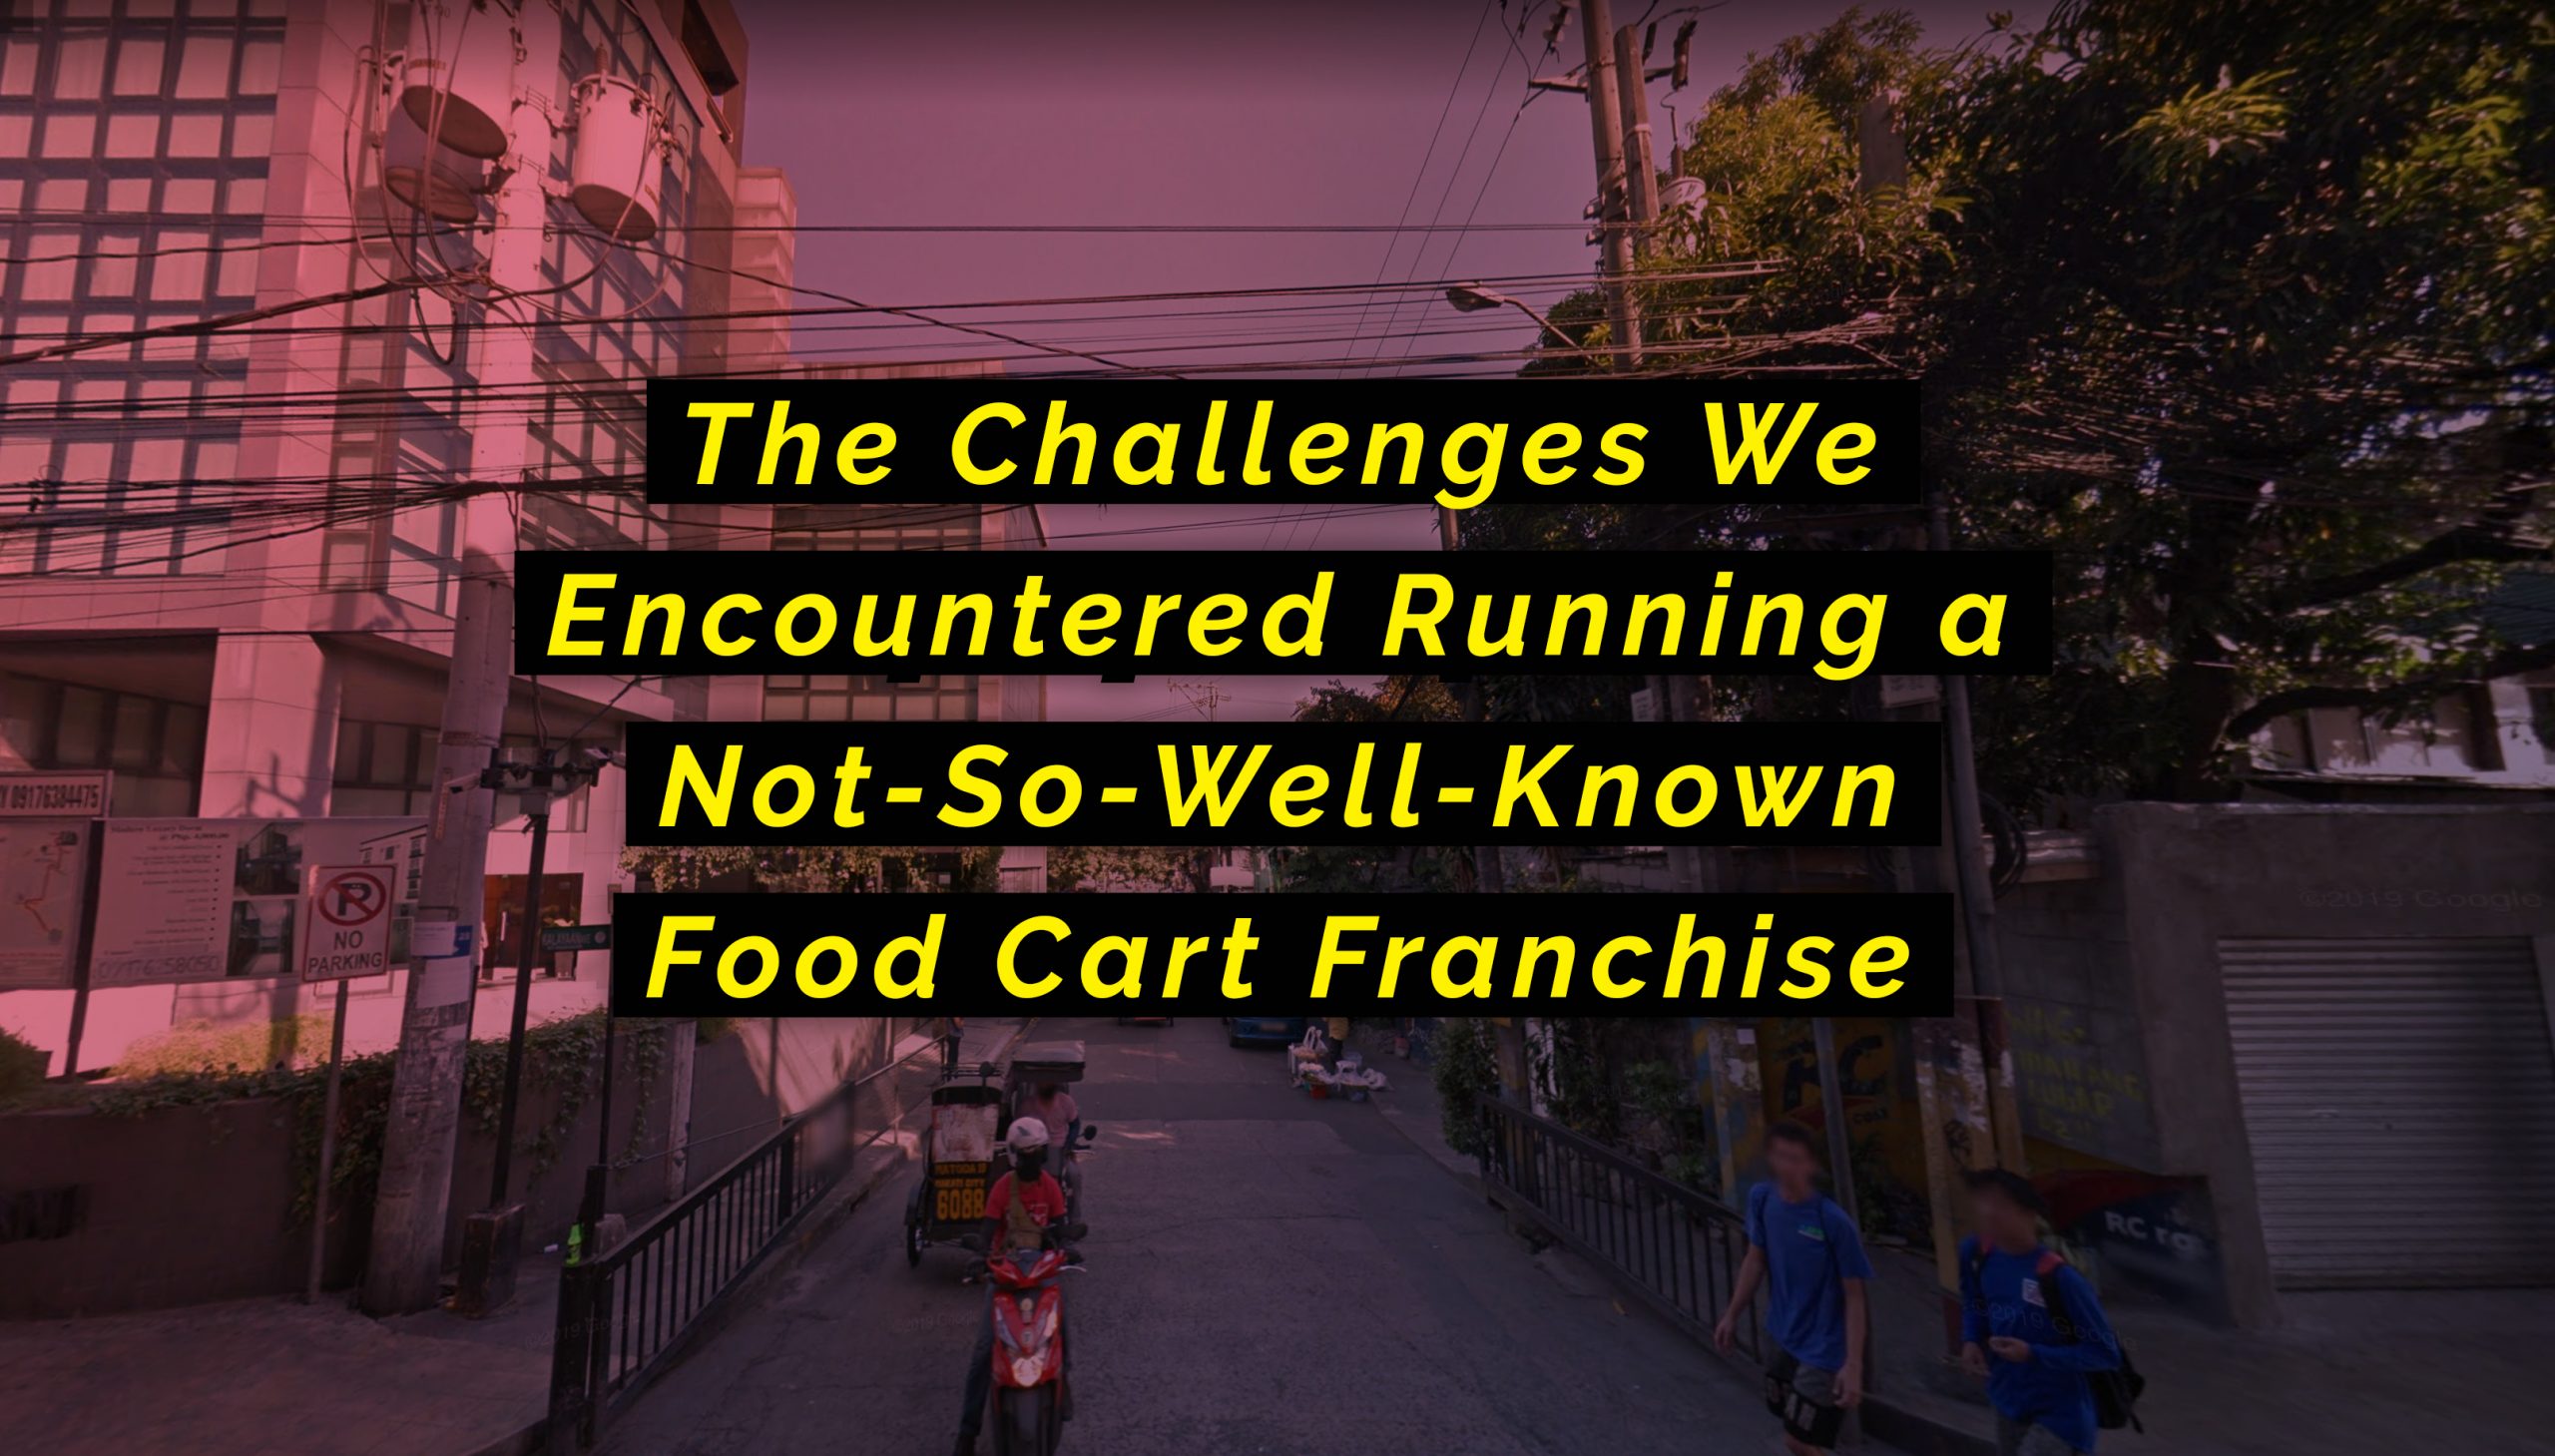 The Challenges We Encountered Running a Not-So-Well-Known Food Cart Franchise